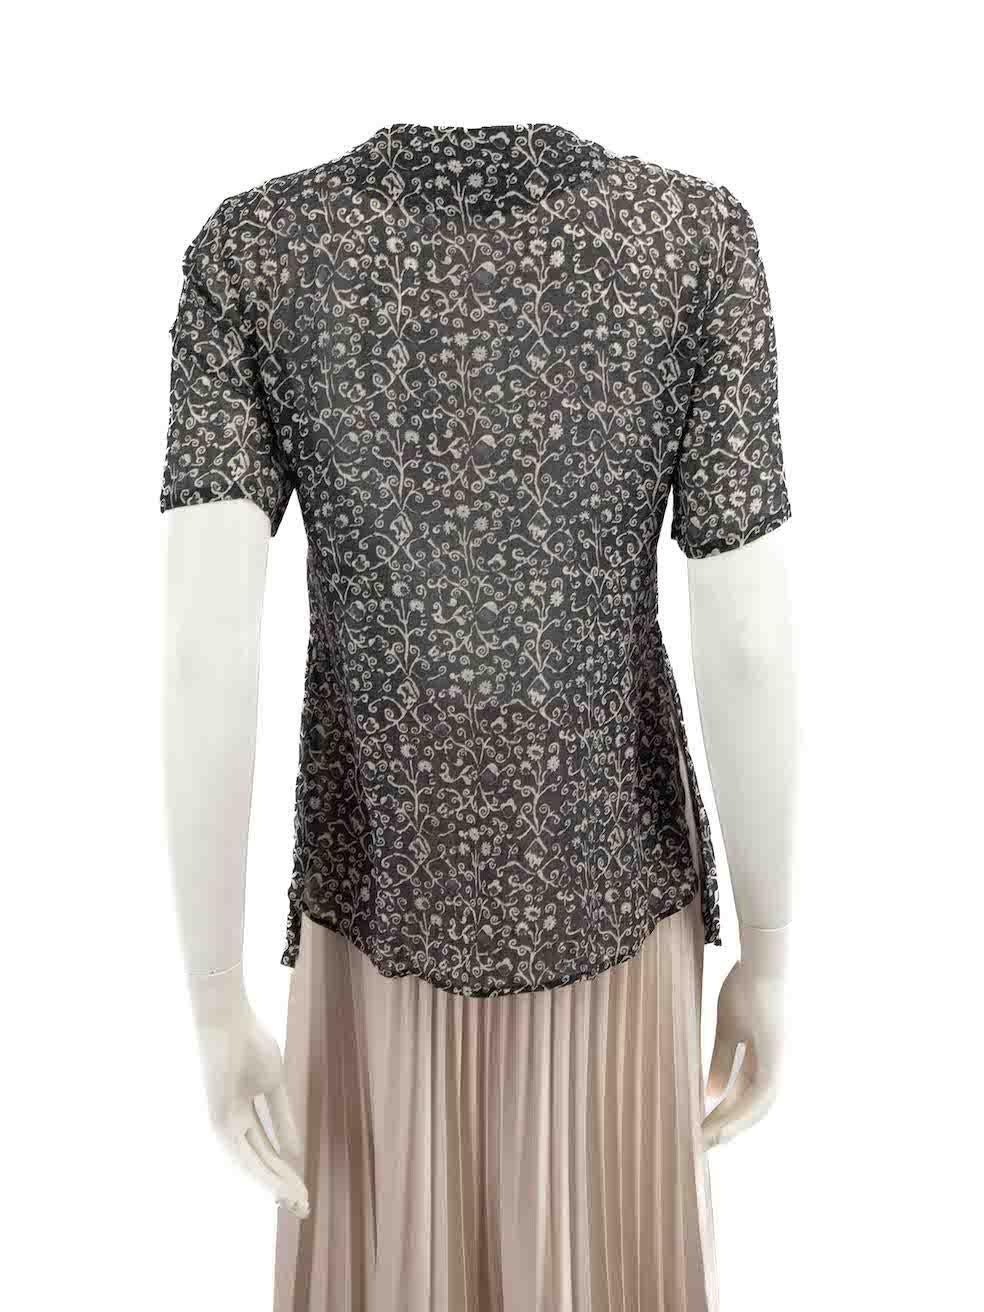 Escada Black Silk Floral Sheer Blouse Size XS In Good Condition For Sale In London, GB